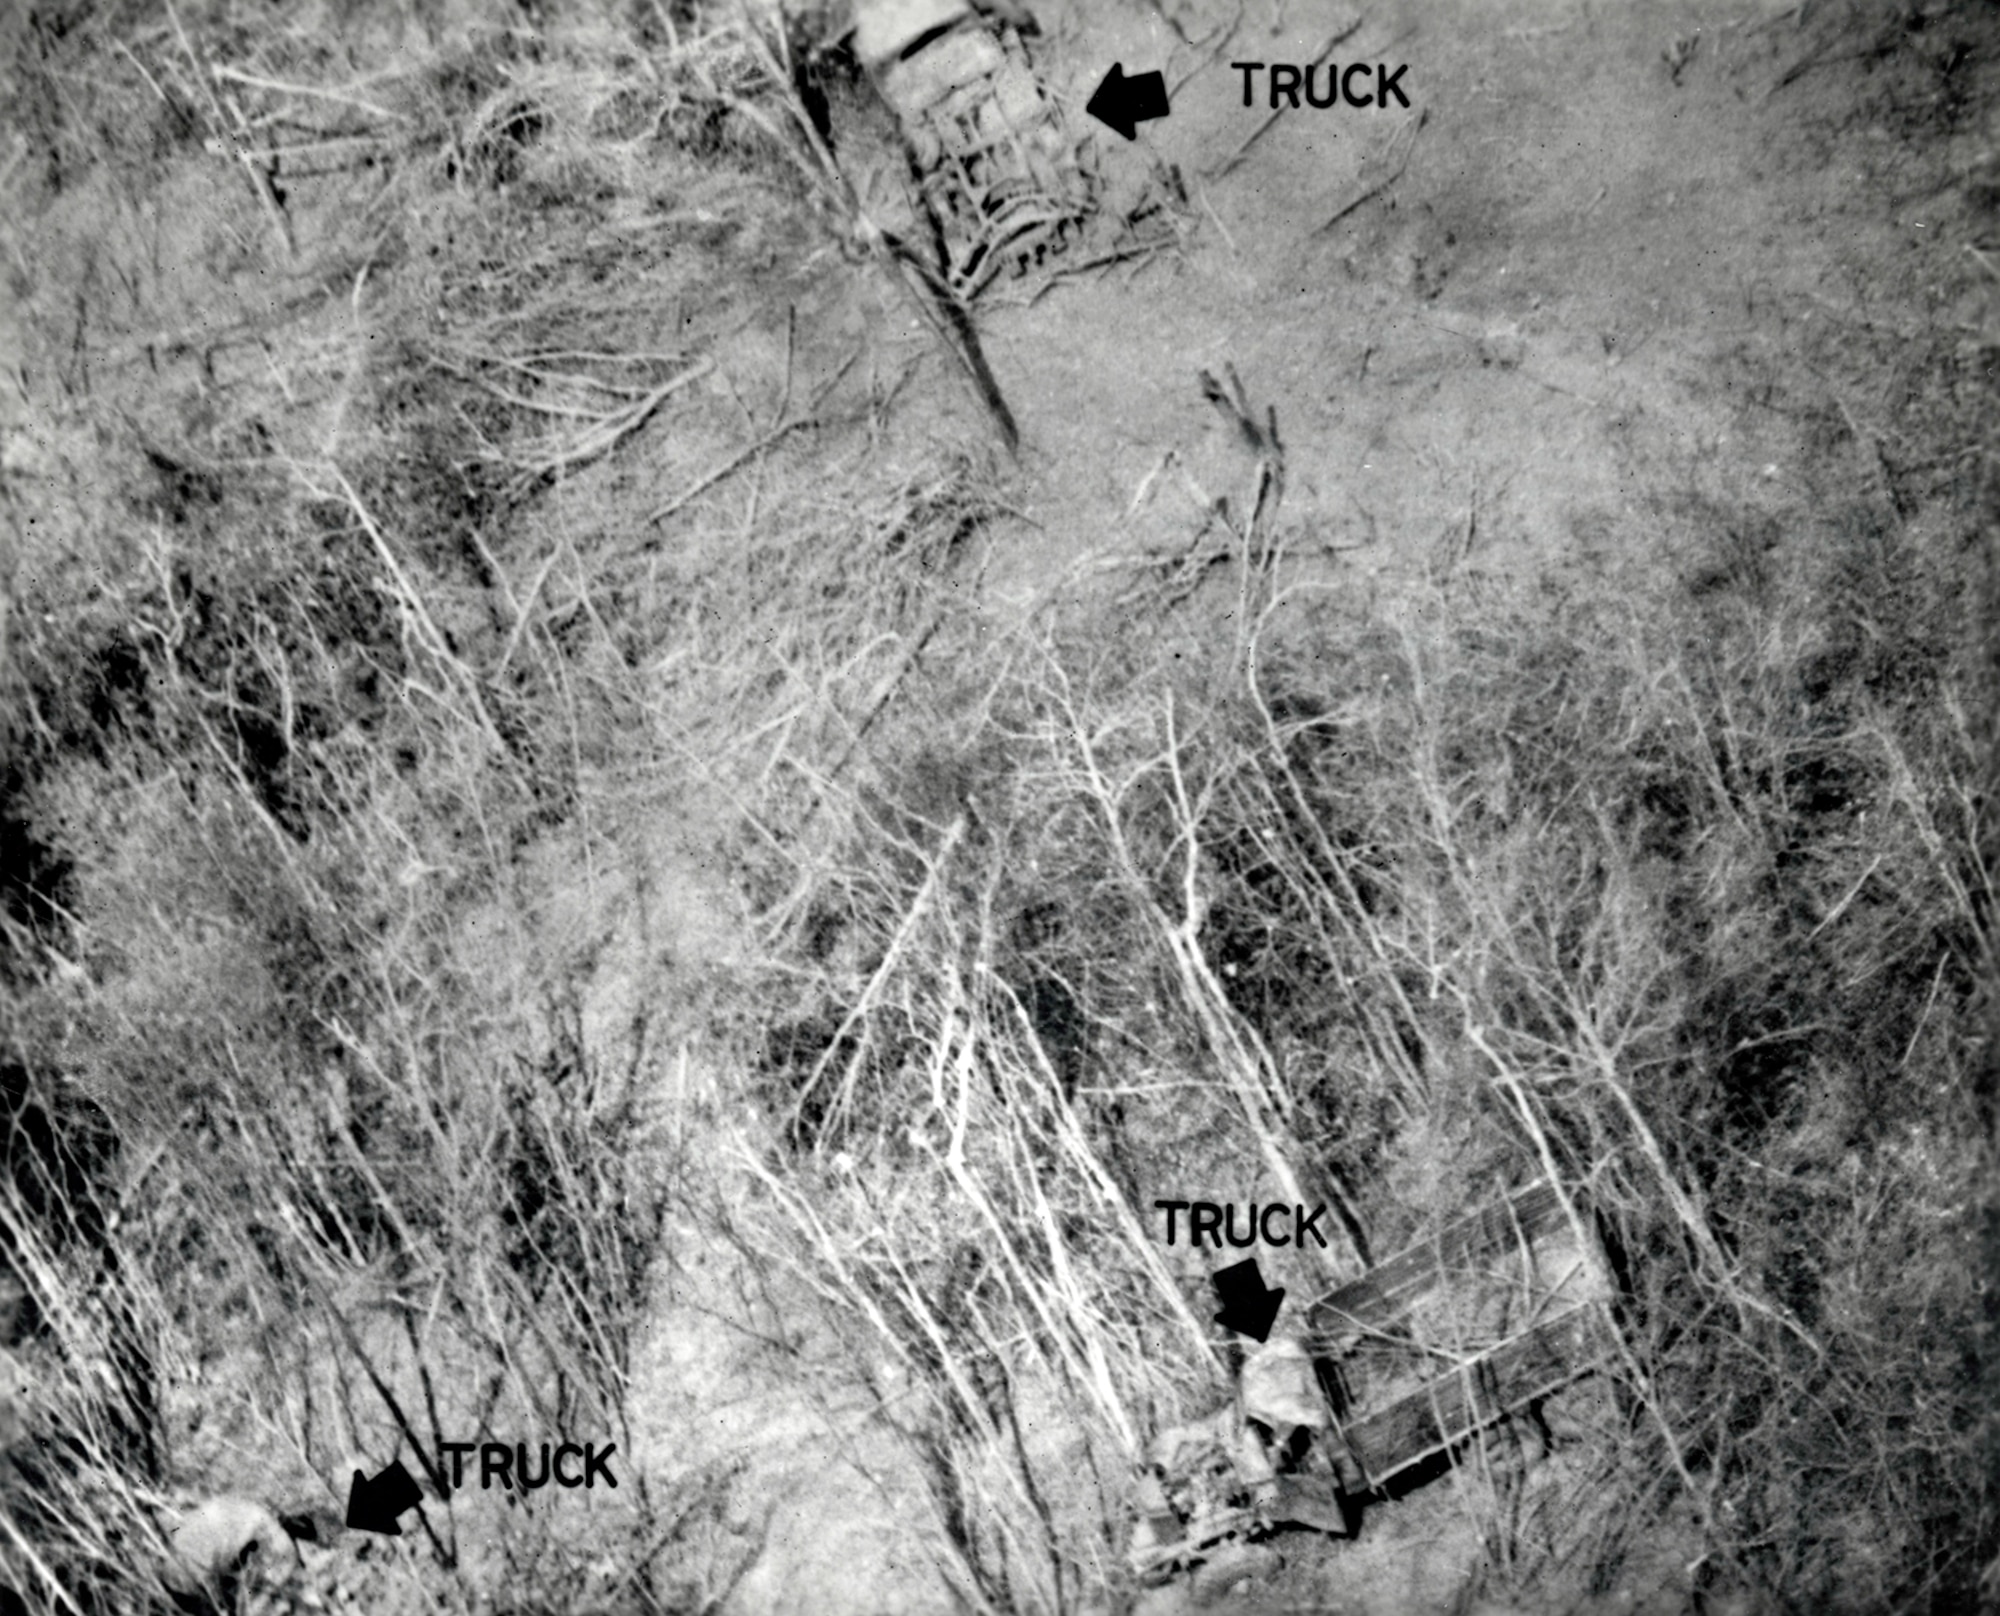 Photograph taken on an RF-4C mission, showing three burned-out communist trucks. The RF-4Cs could take photographs day or night using optical cameras, infrared cameras or radar. (U.S. Air Force photo)